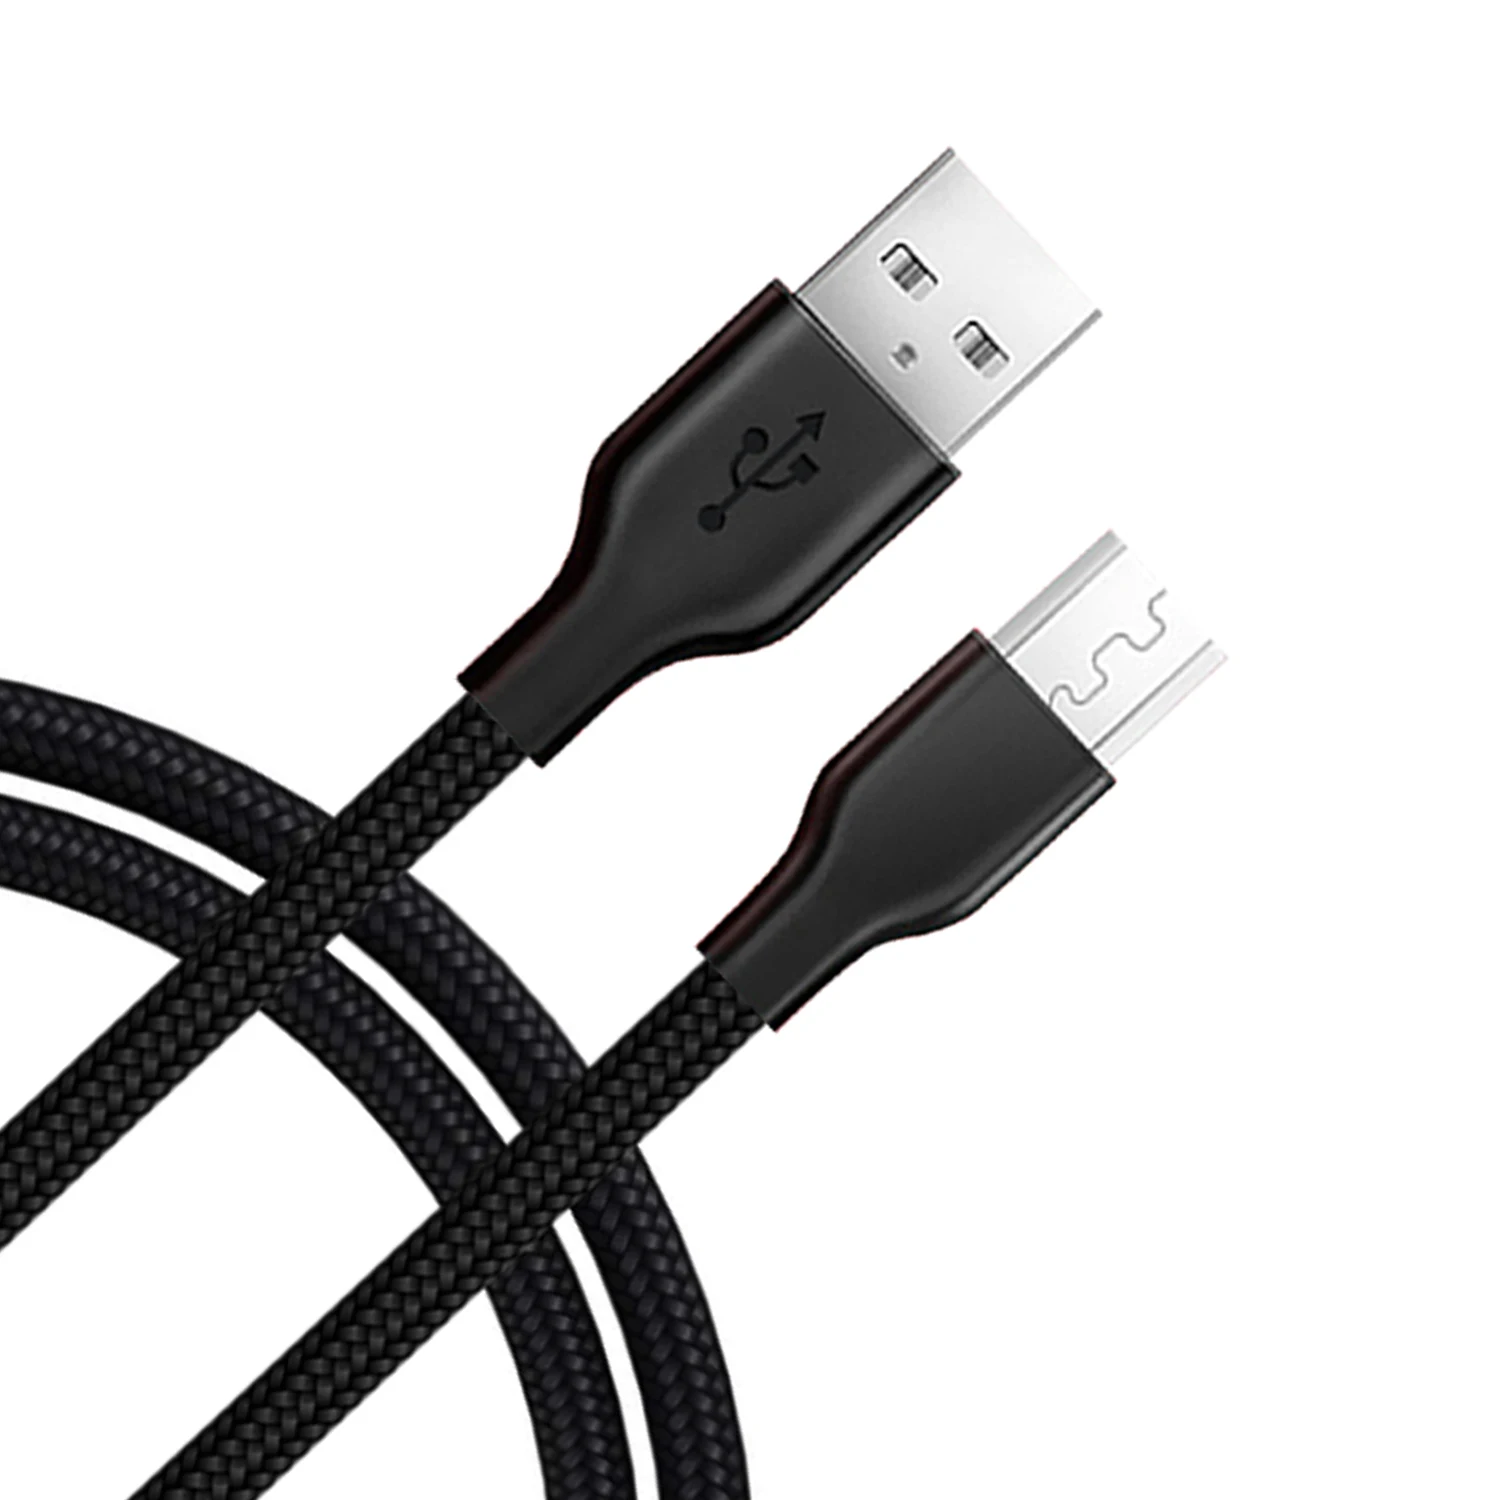 6ft USB to Micro USB Data Charger Cable Cord for Amazon Kindle Fire HD 7 